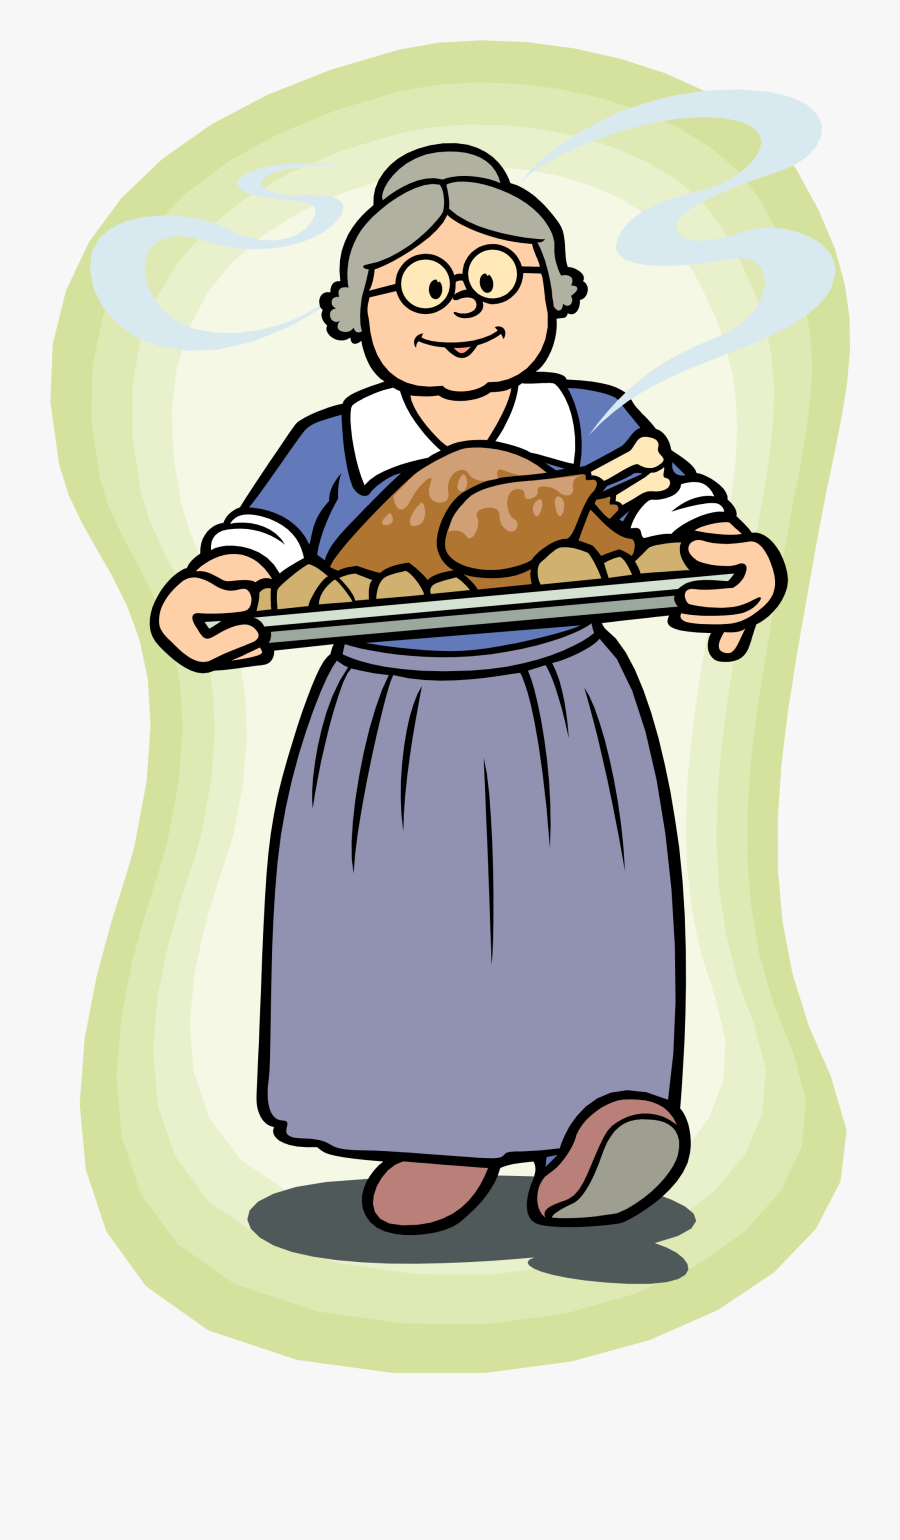 Grandma Clipart Blessed - Grandmother Cooking Animation Gif, Transparent Clipart